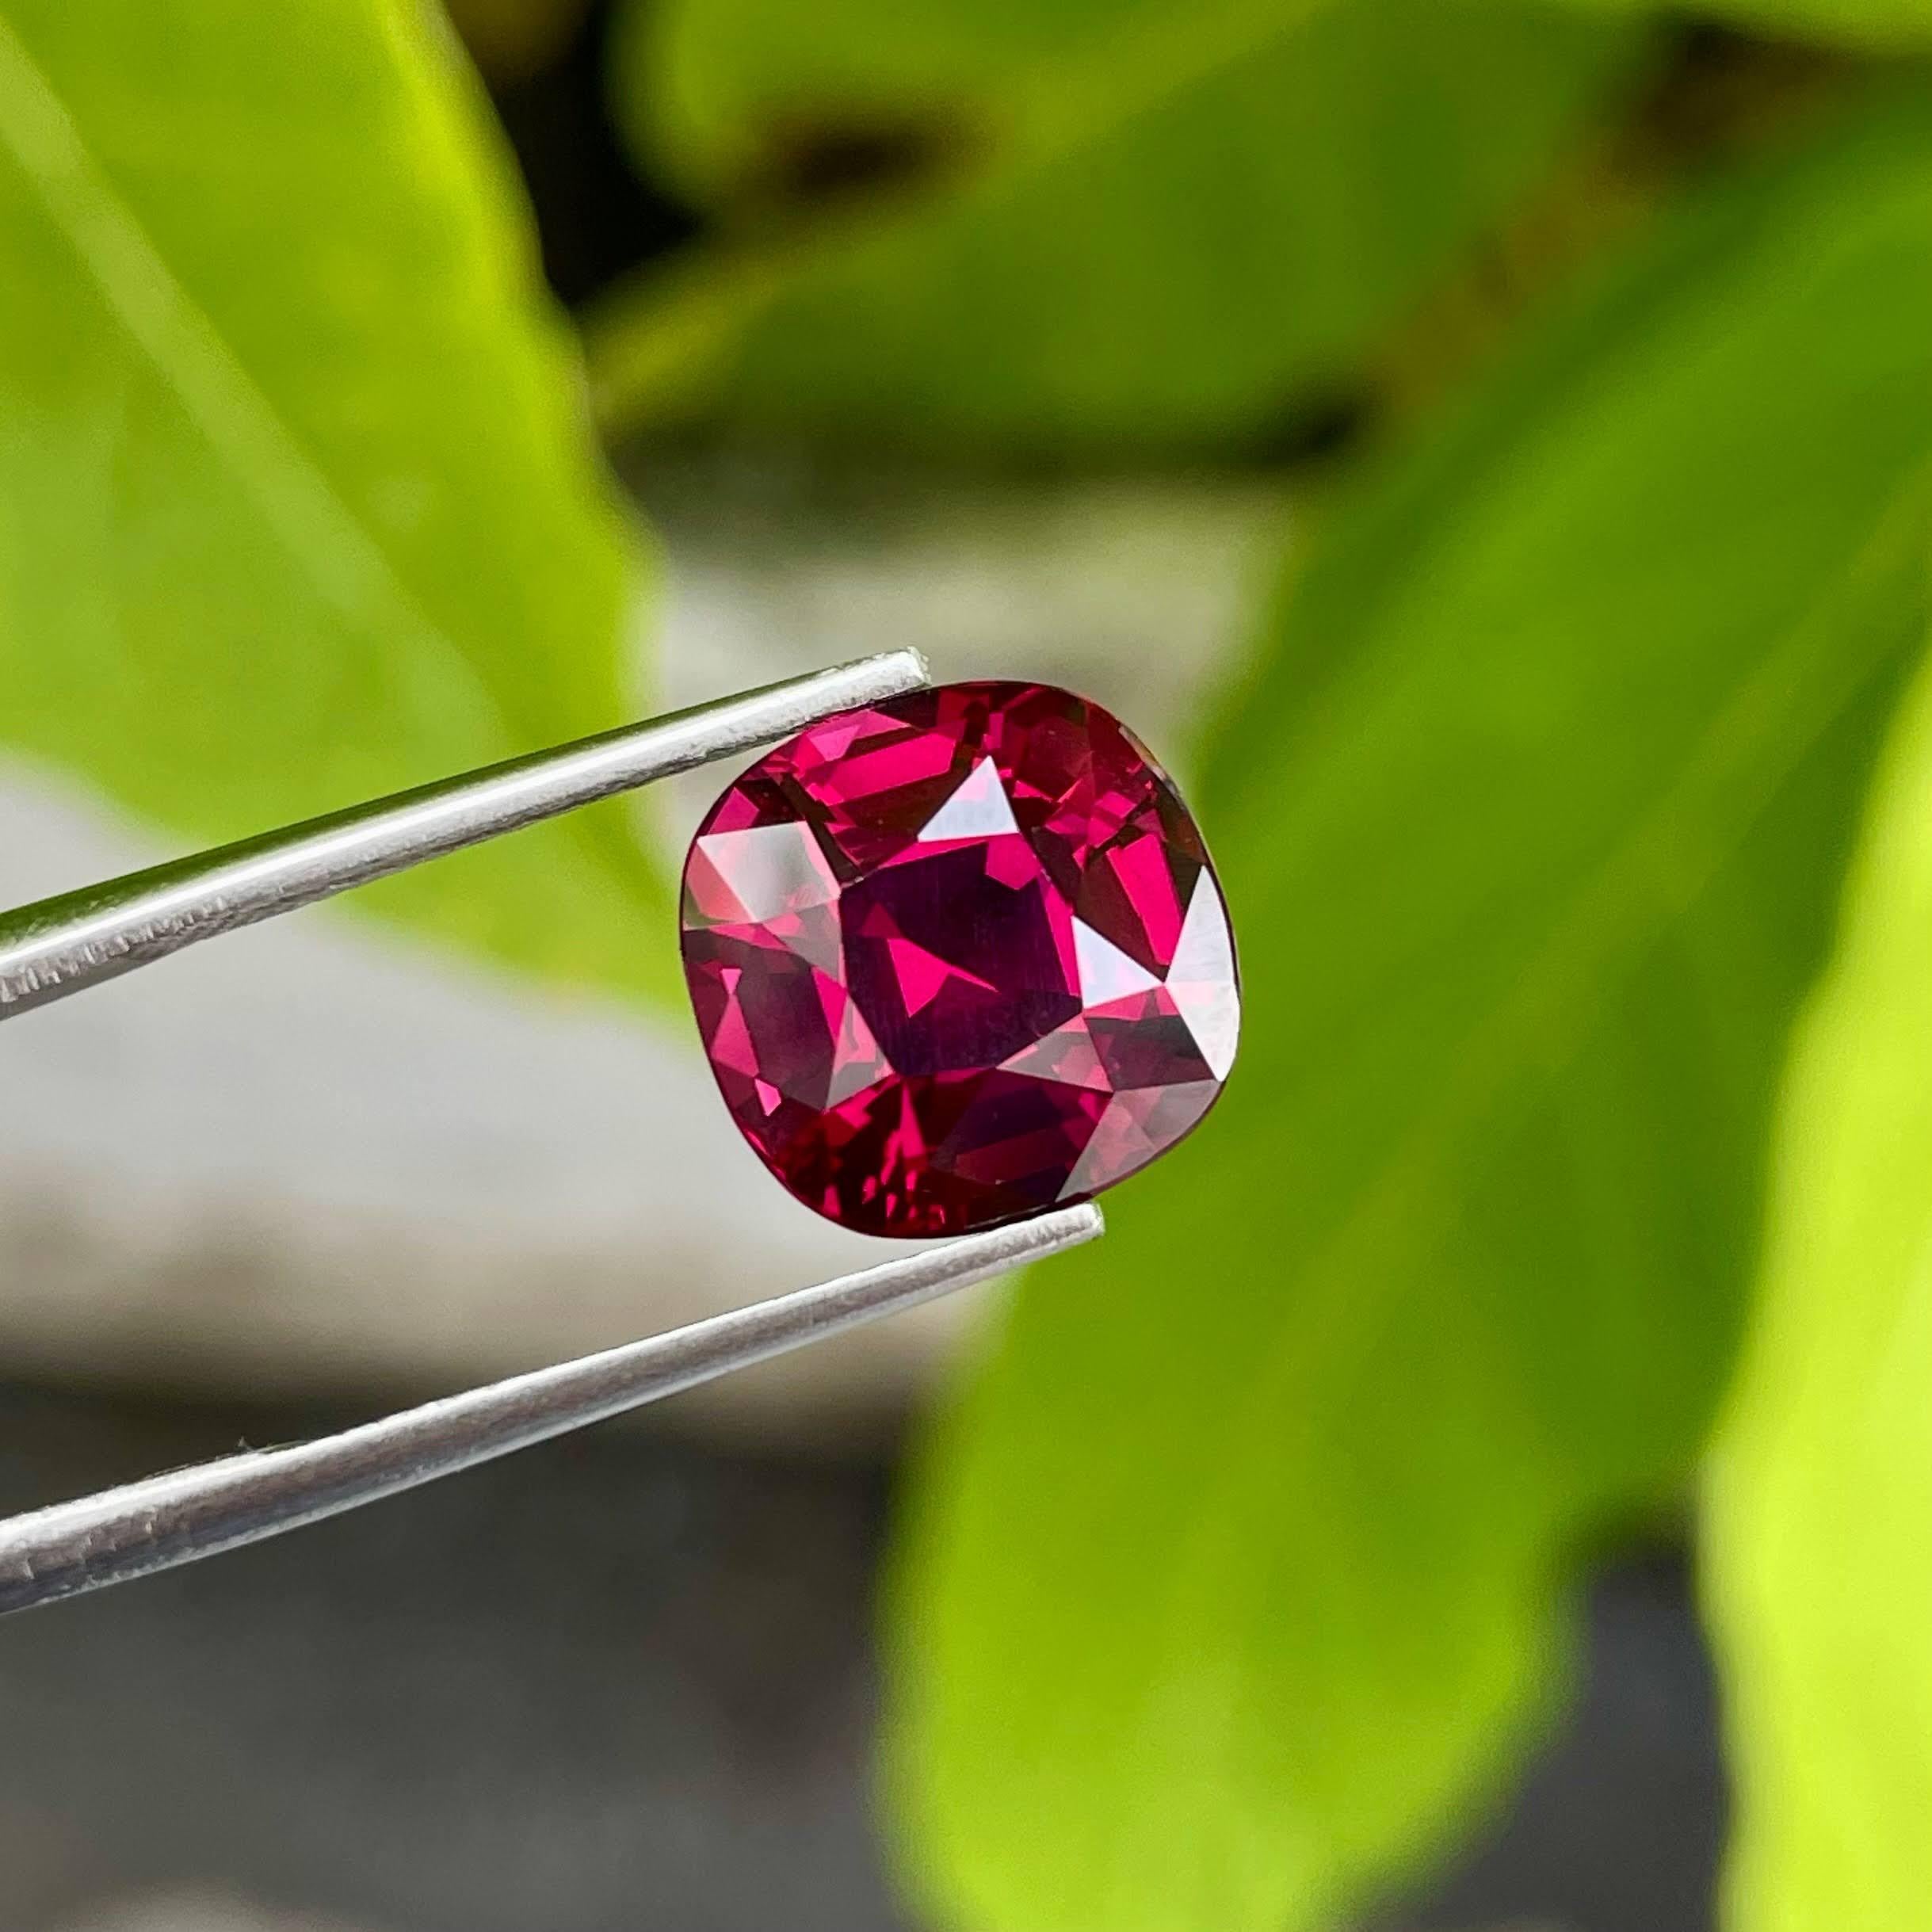 Weight 6.94 carats 
Dimensions 11.00x11.01x7.69 mm
Treatment none 
Clarity eye clean 
Origin Tanzania 
Shape cushion 
Cut Fancy cushion 





The exquisite beauty of this 6.94-carat Fire Reddish Pink Garnet is truly captivating, showcasing a